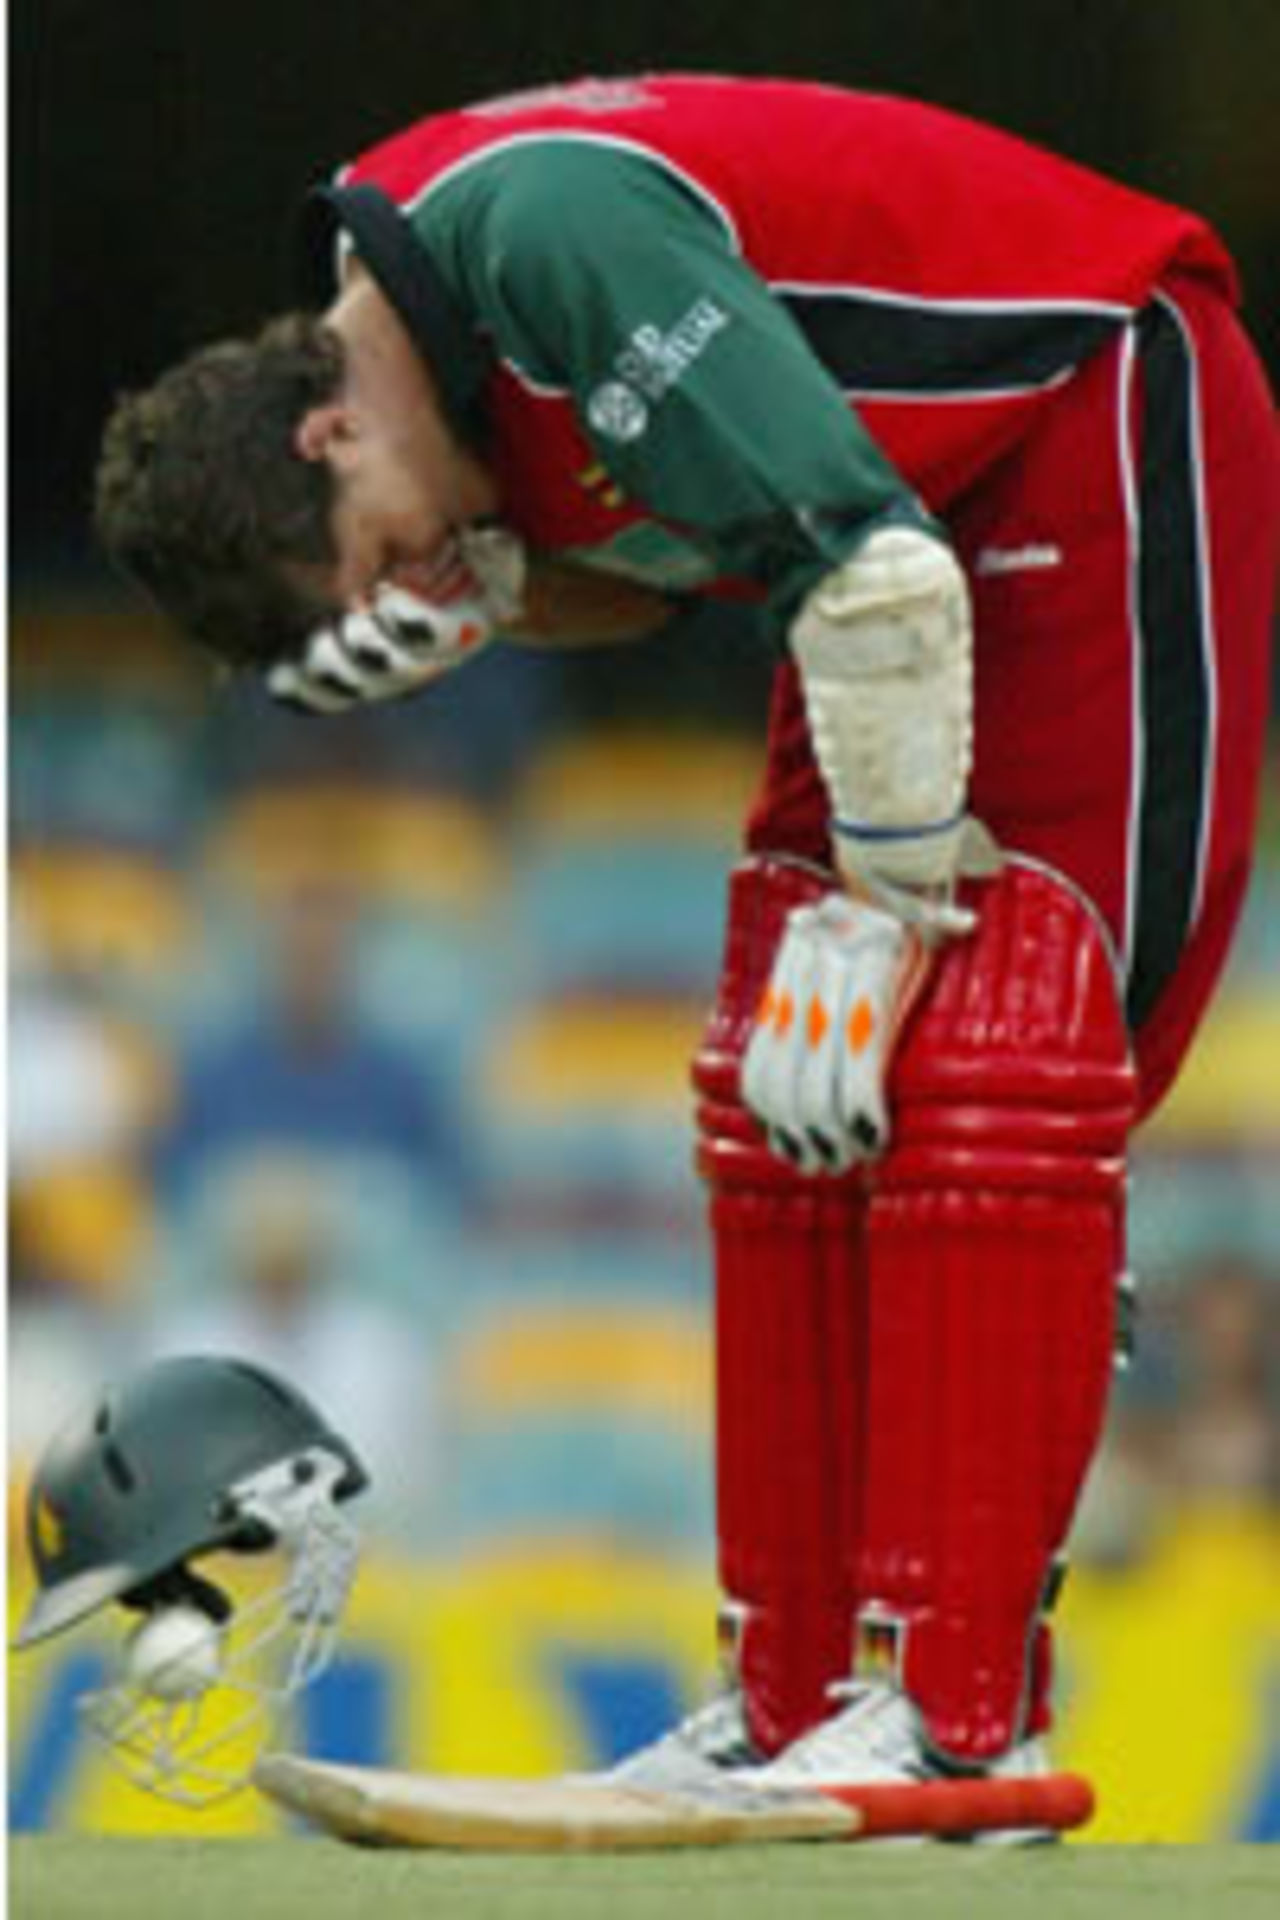 Mark Vermeulen retired hurt after being struck on the helmet by Irfan Pathan